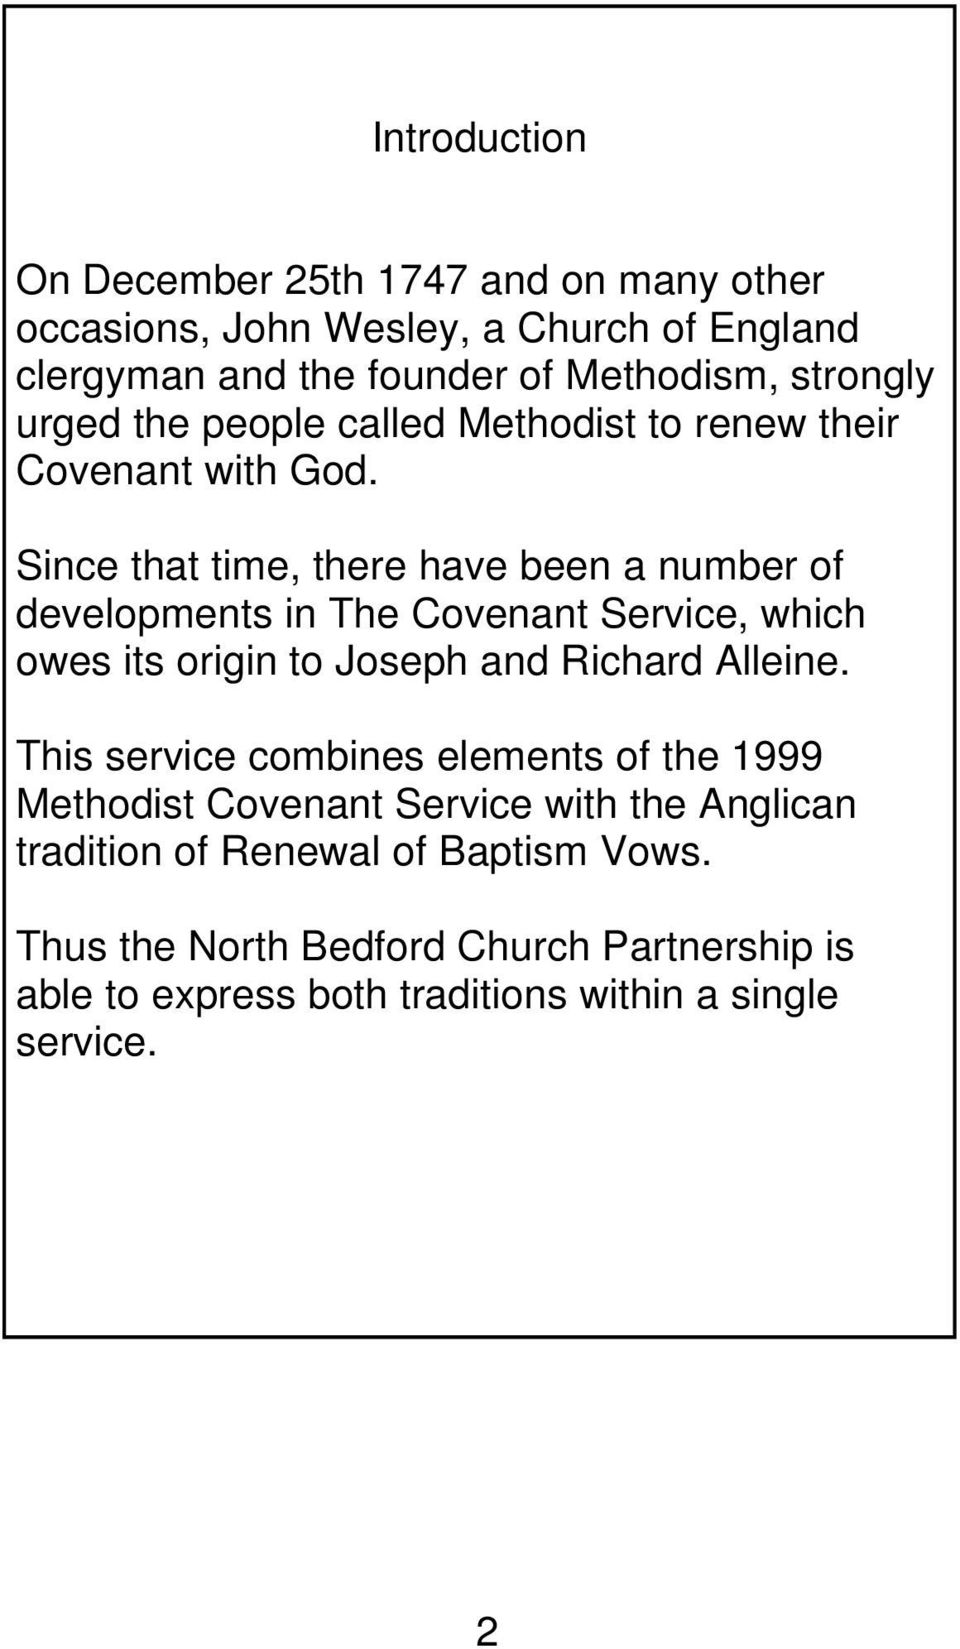 Since that time, there have been a number of developments in The Covenant Service, which owes its origin to Joseph and Richard Alleine.